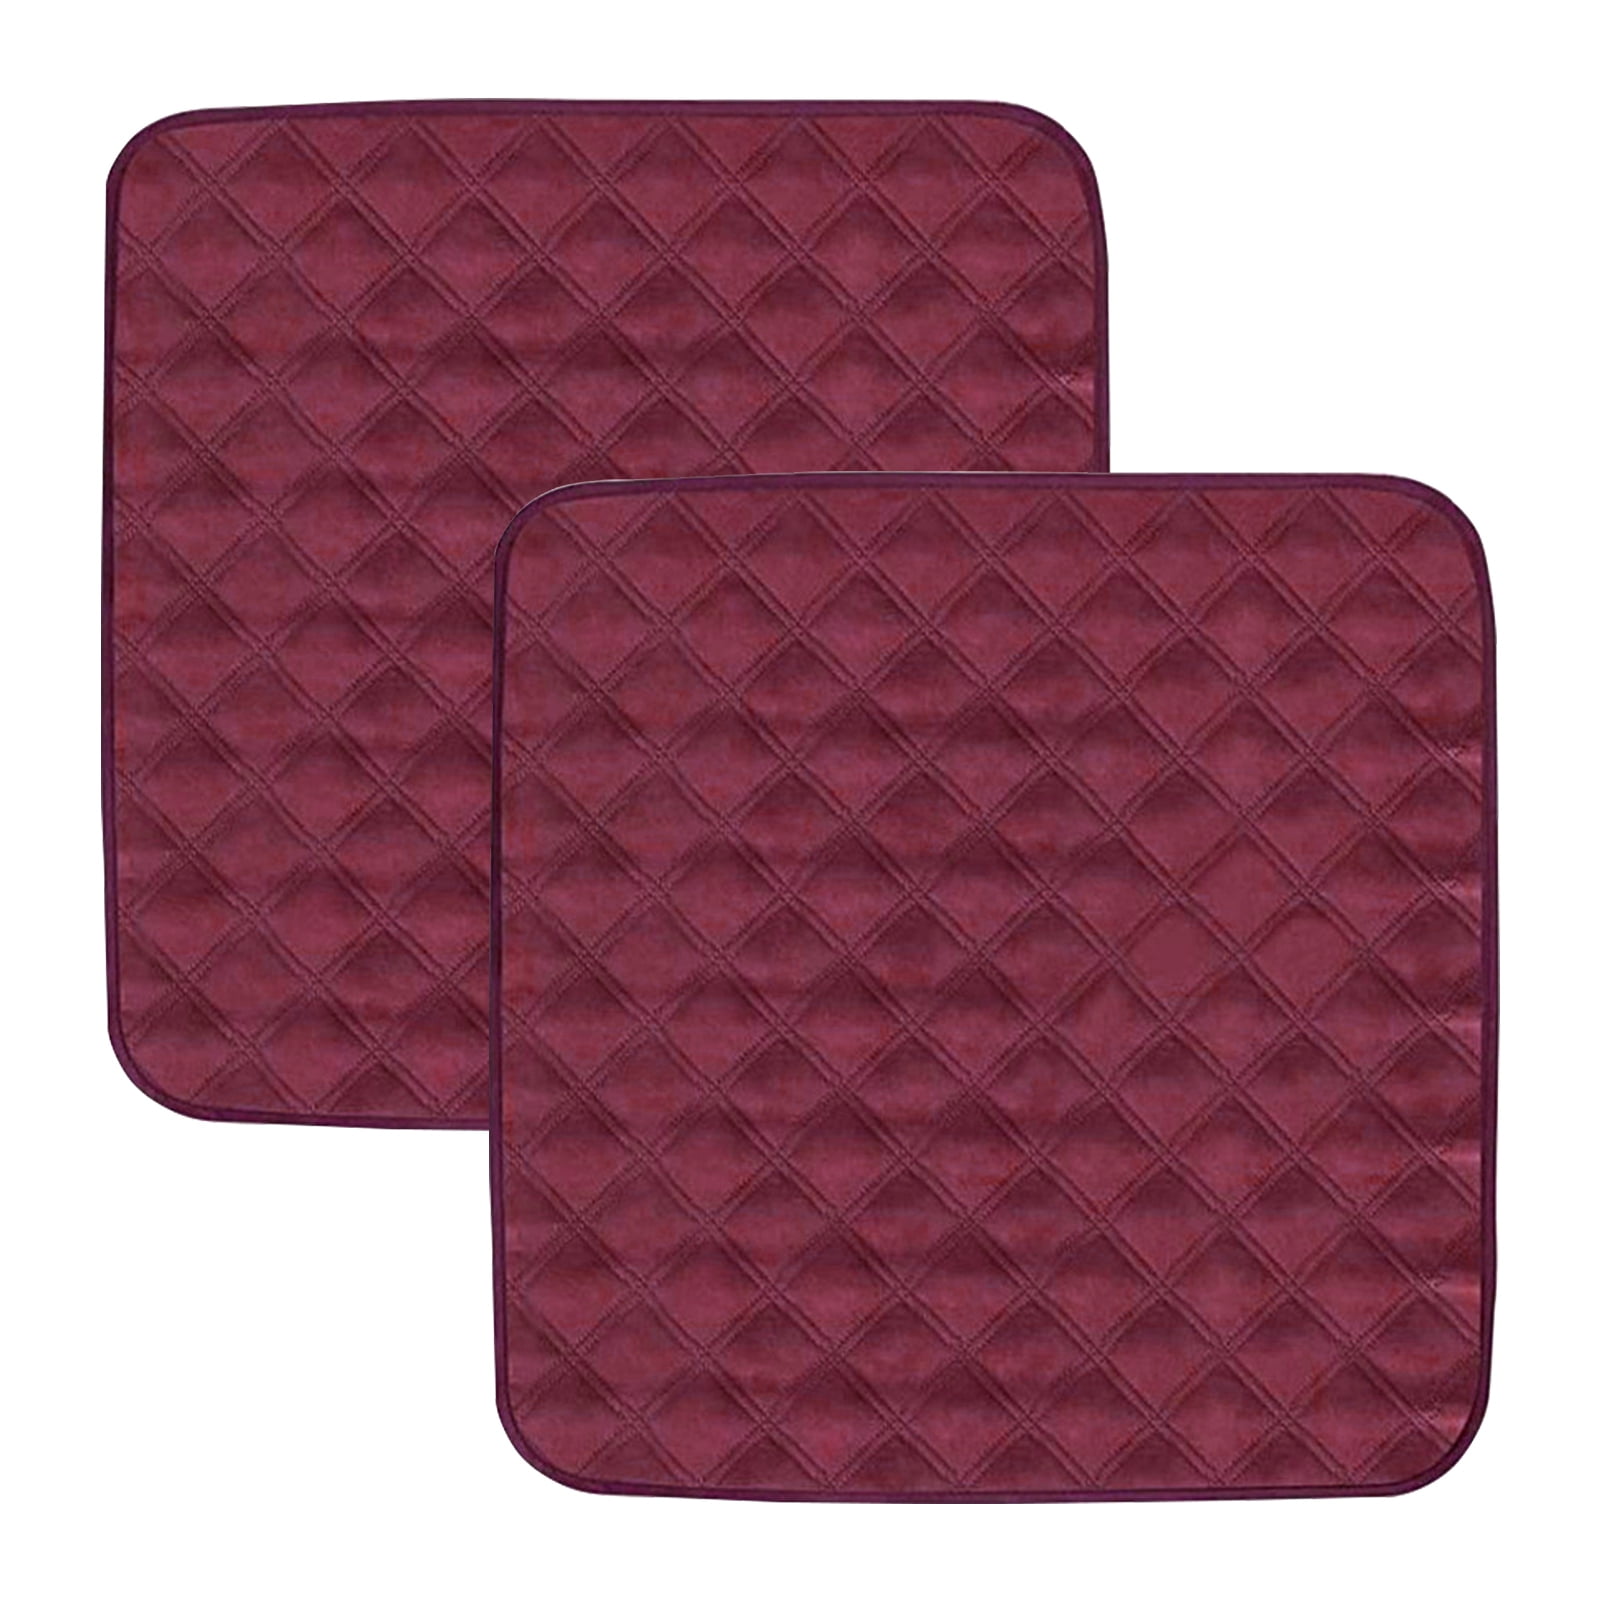 Bobasndm 2PCS Absorbent Chair Pads for Incontinence, Fall Pad for ...